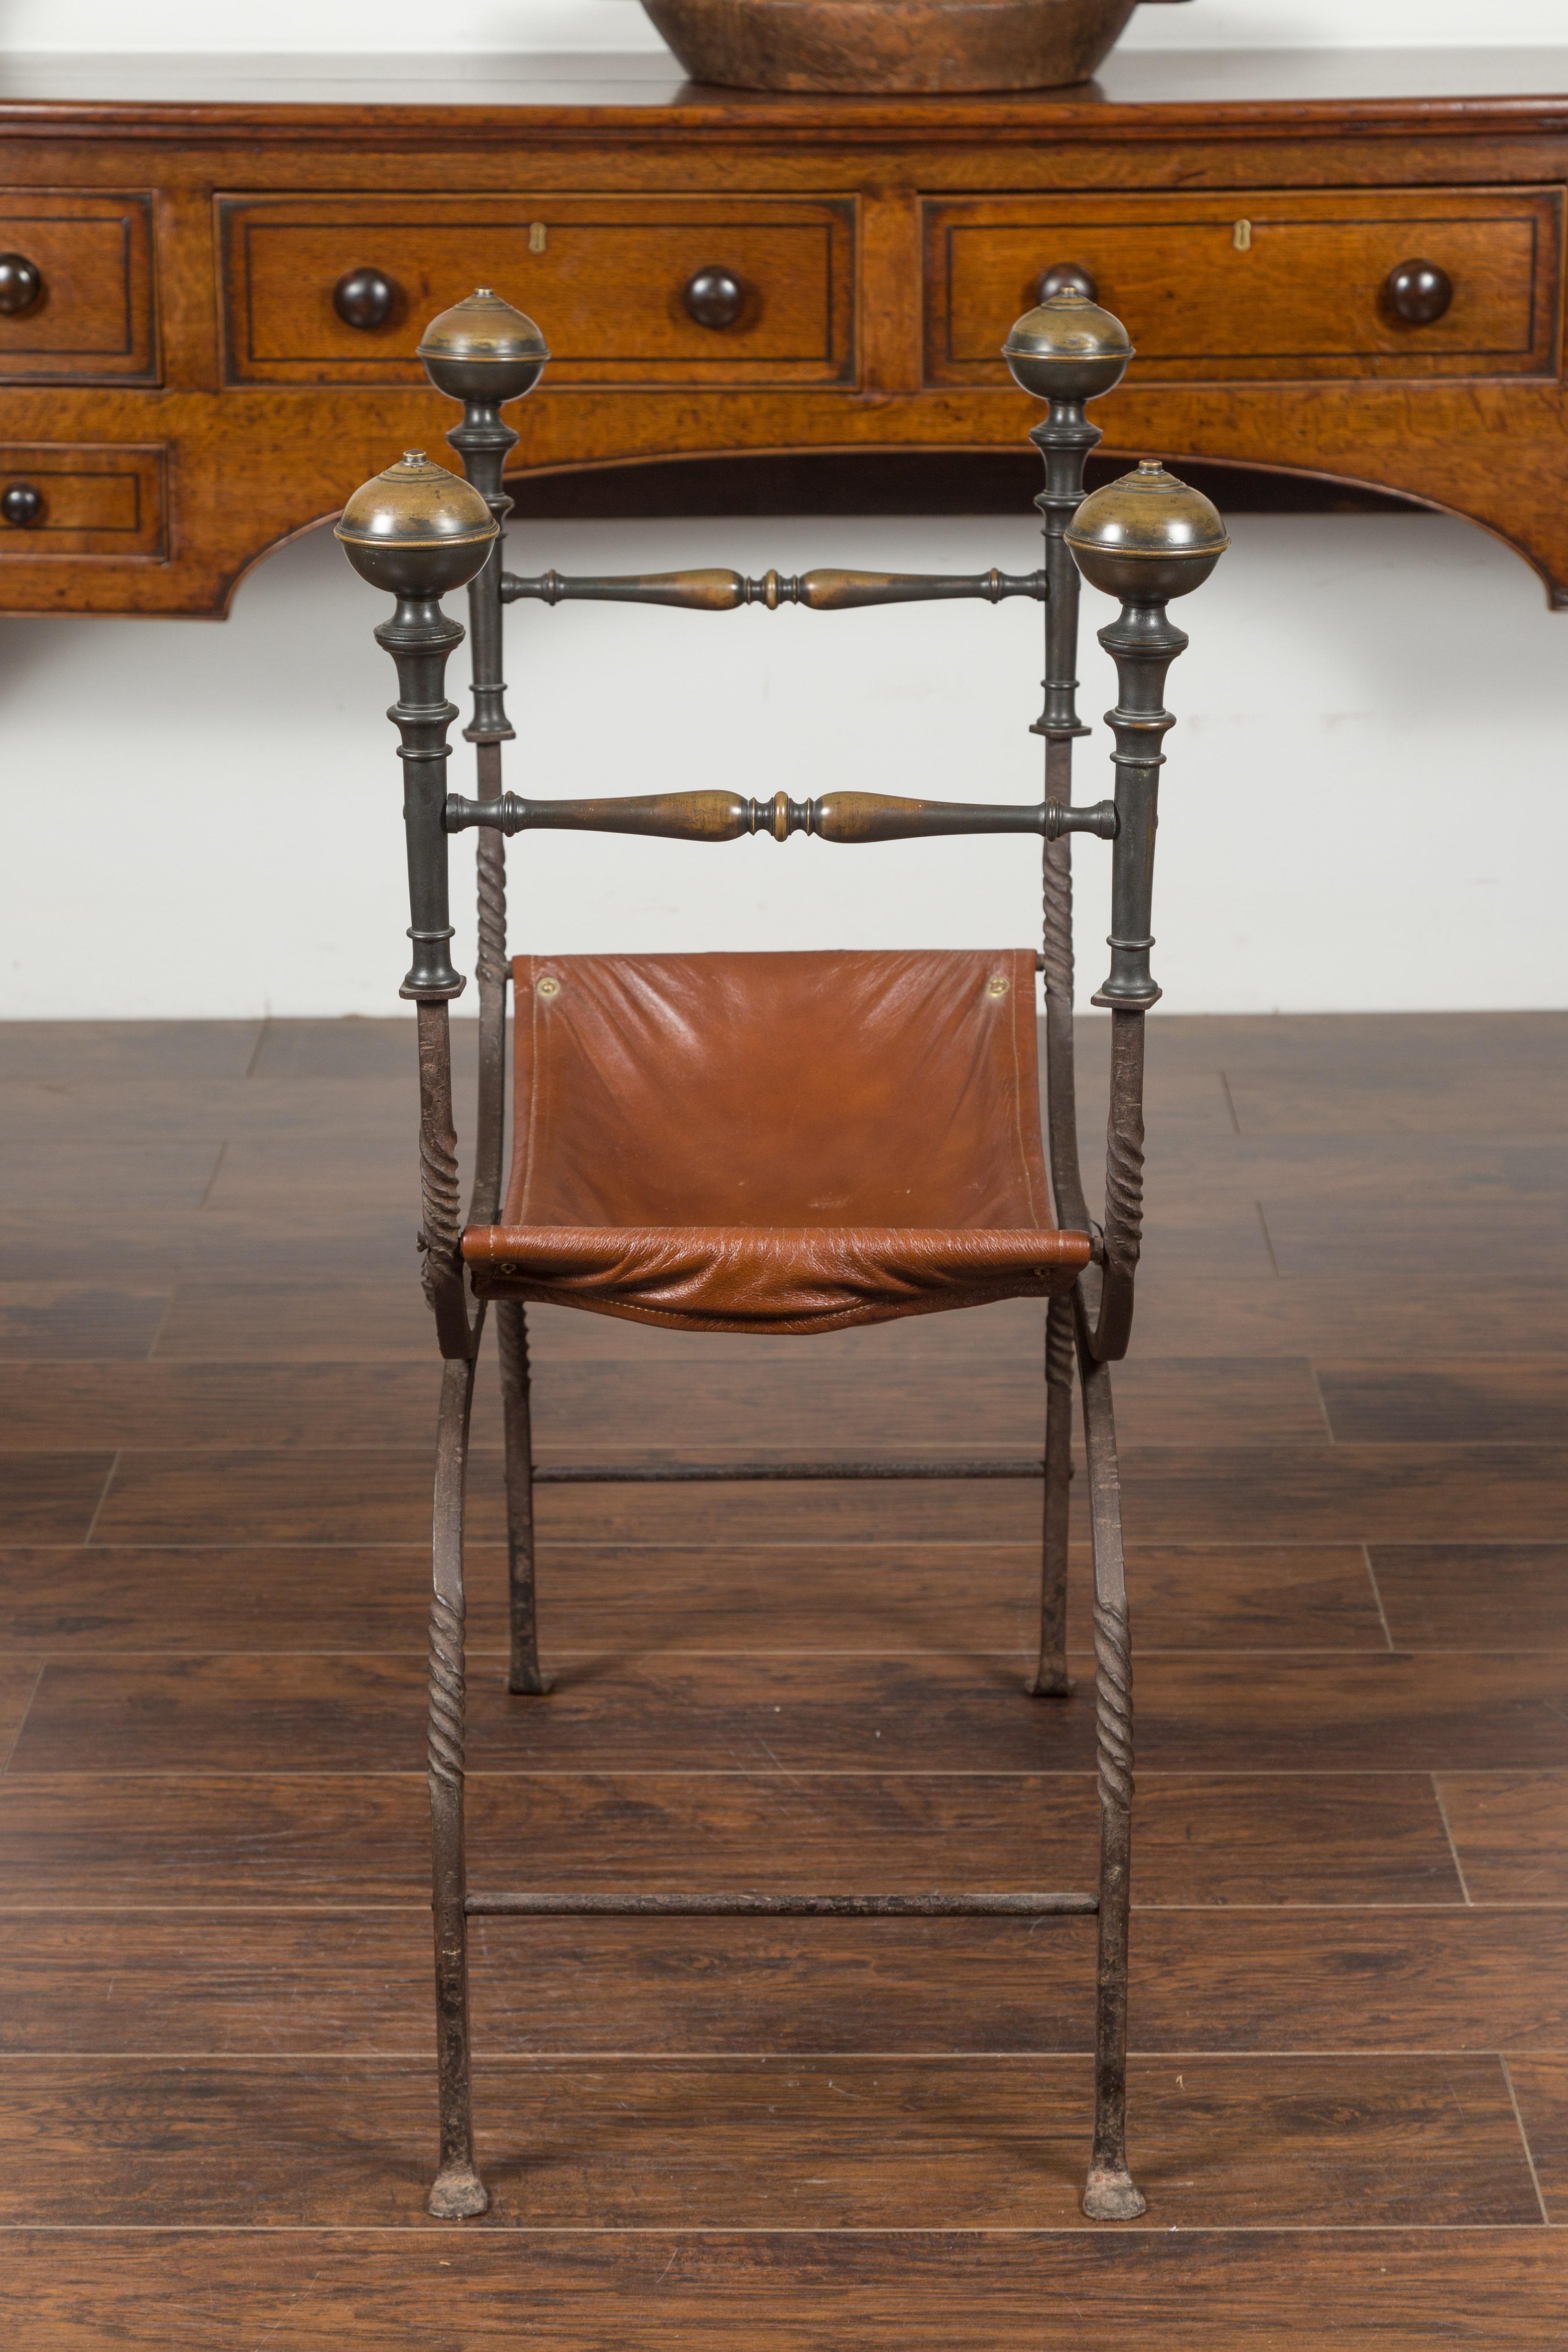 Italian 1900s Leather Seat Iron Folding Curule Stool with Toupie Finials For Sale 7